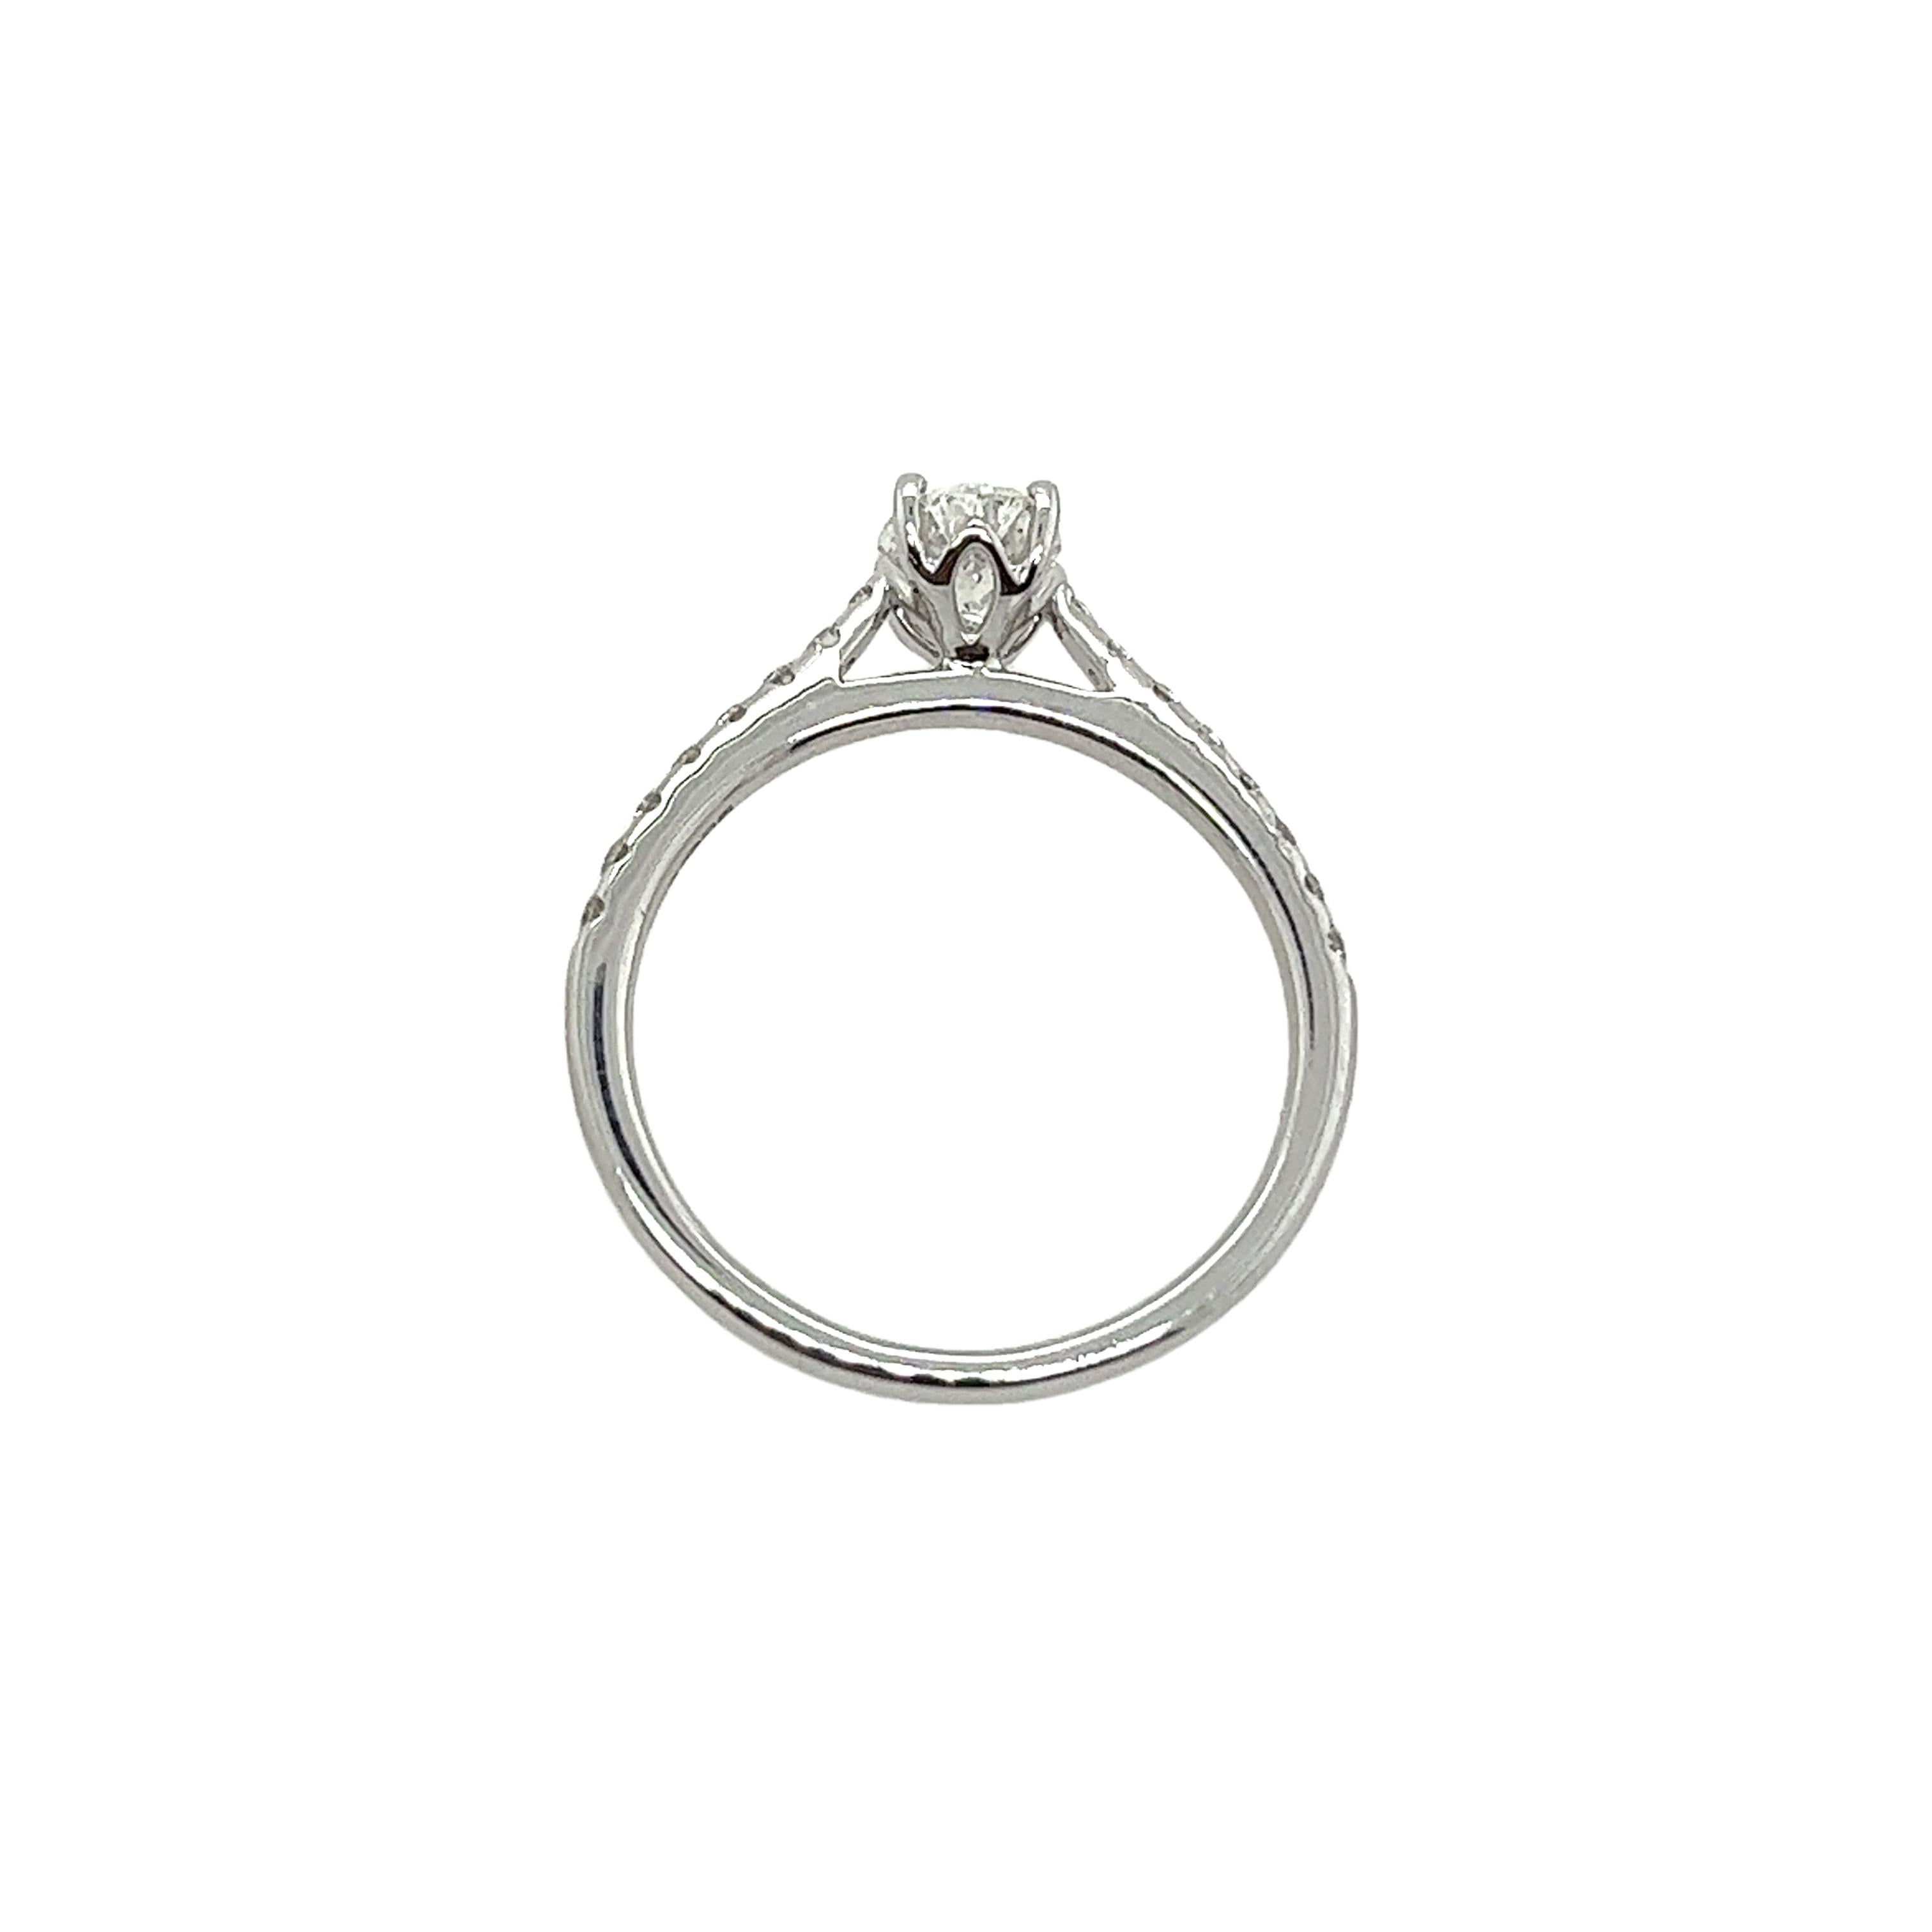 Women's 9ct White Gold Diamond Solitaire Ring Set With 0.51ct Natural Oval Diamond For Sale